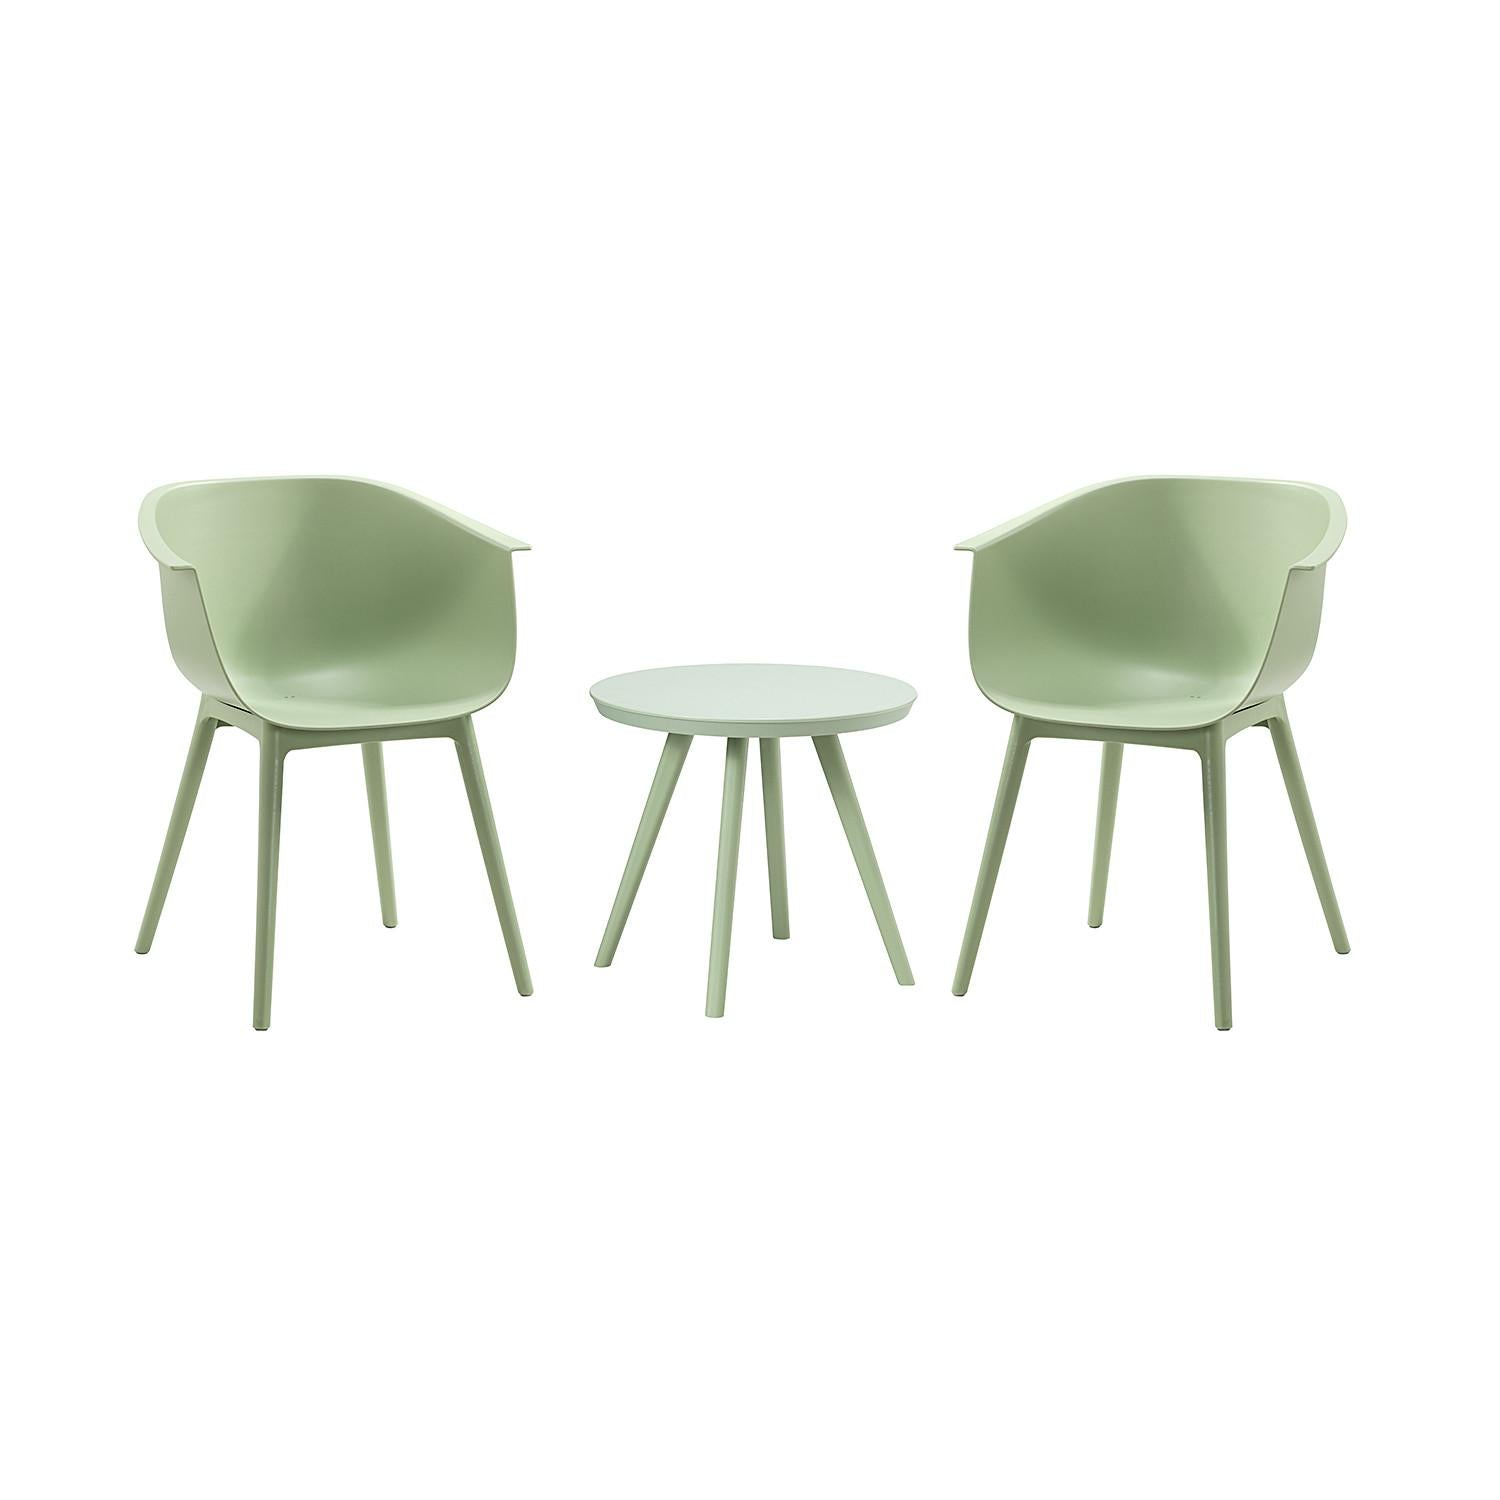 Solid Pale Green Contempo Outdoor Chairs and Table Set